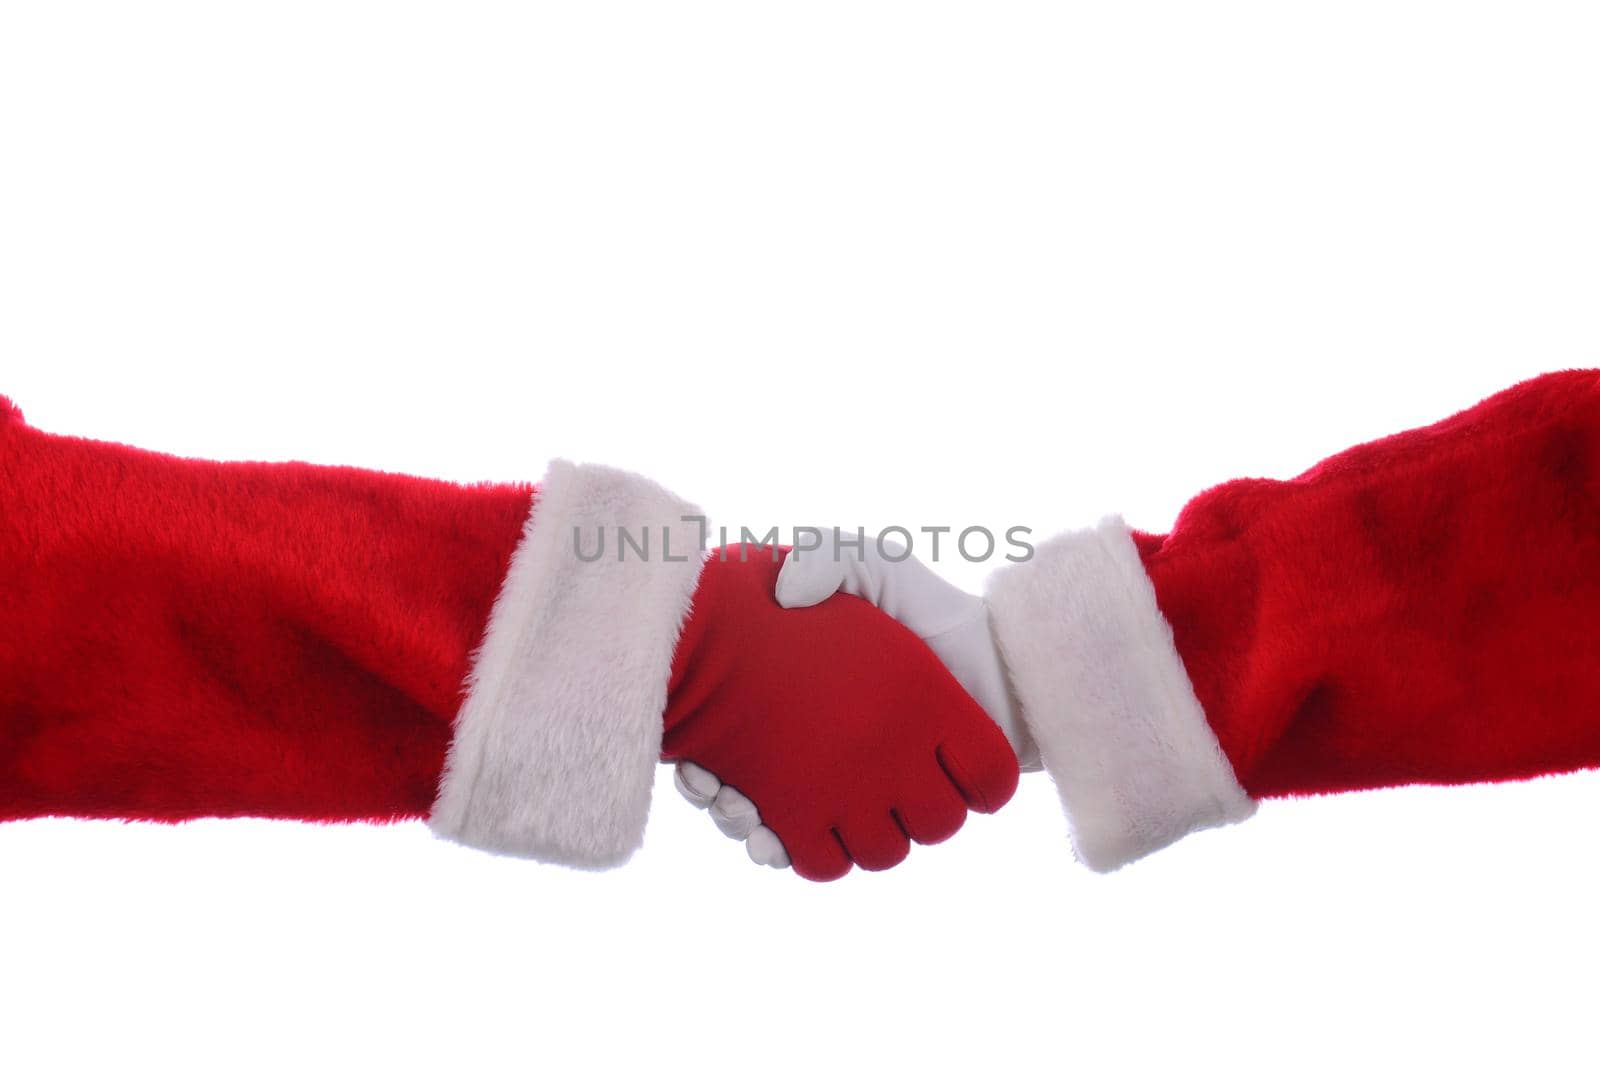 Two Santa Claus' shaking hands over a white background. One Hand is in a red glove the other is wearing a white glove.